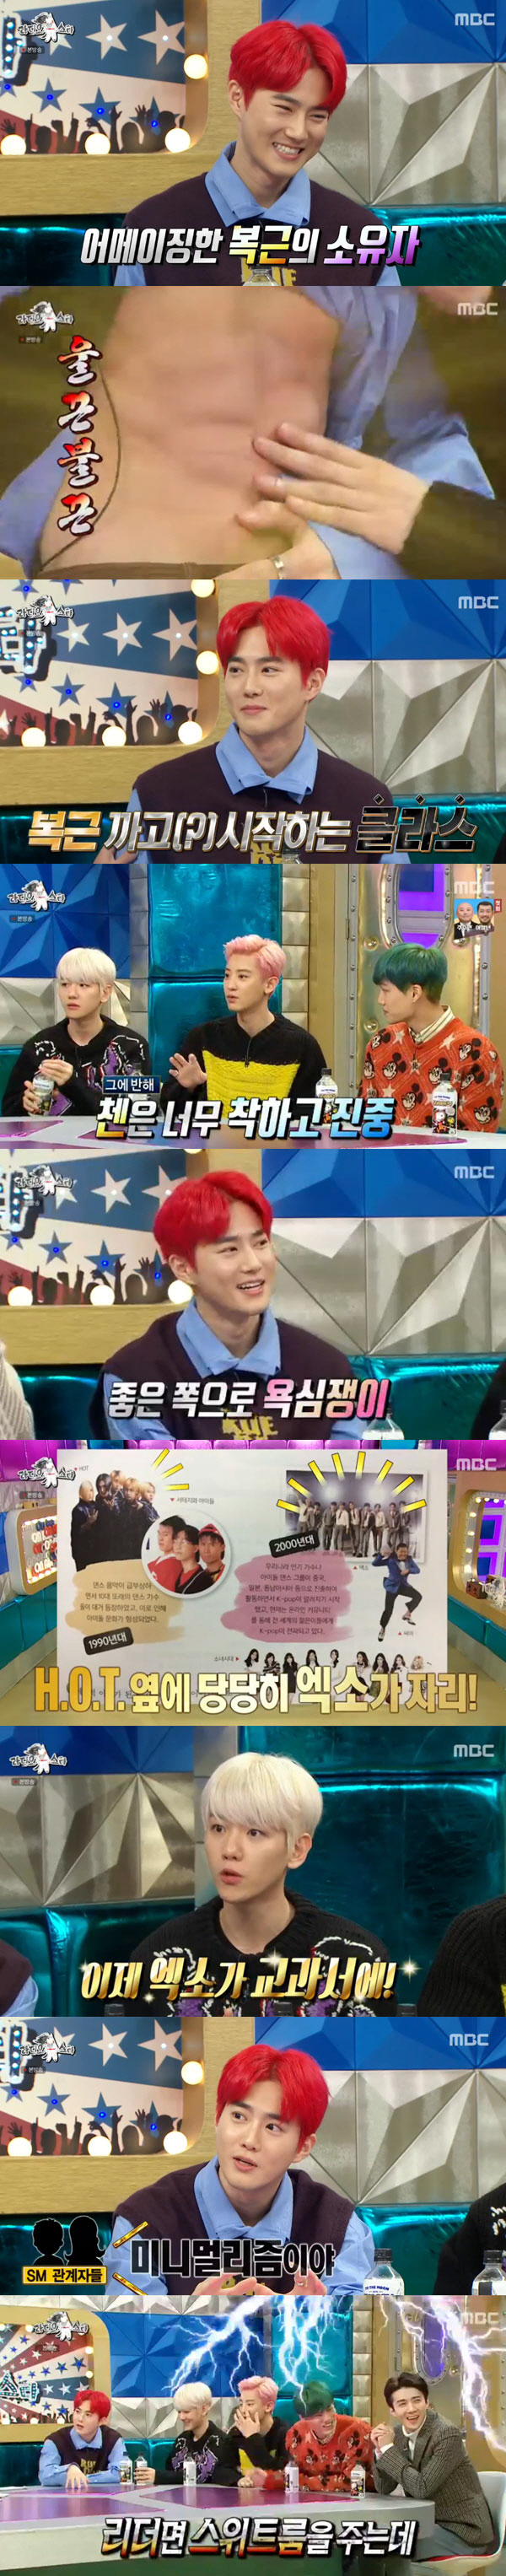 Global Idol EXO is on Radio StarMBC entertainment program Radio Star broadcasted on the 4th was featured as EXO Radio Star feature.EXO members Baekhyun, Kai, Sehun, Suho and Chanyeol appeared as guests and Chen went on to become a special MC.As soon as EXO appeared in the studio, Kim asked Suho to abs and embarrassed Suho. Baekhyun was also embarrassed, saying, Its been less than five minutes since I came in.However, Chanyeol naturally said, This is not what you do, but what others do. Suhos clothes were raised to reveal his abs and make the atmosphere hot from the beginning.The members doubted Chens ability to proceed as a special MC. Chanyeol said, Chens performance is not at all expected. Chen is good and serious.I think I will be attacked by the members. Sehun said, When Chen said that he was doing MC, Suho was reminded of him. Suho is motivated and passionate.I think I was jealous. When MCs asked, Did you feel sad? Suho said, I thought it was wrong.I wanted to be here because Chen was here. The members also honestly told the story of the income. Baekhyun, whose solo album sales amounted to 500,000, ranked first among the members.I also lived hard, doing musicals, doing movies, Suho said.Kai is an embezzler of luxury brands, and Chanyeol is making personal income from financials, Confessions said.In particular, Chanyeol said, In fact, I became a landlord two months ago. At that time, my mind became very relaxed.Kim Gura pointed to Suho and asked the members, What criteria do you choose the leader? Baekhyun said, When I think about it, he is the person who can keep the most neutral.However, he added a joke, Its good there and the house is good.Although he added a joke, the members agreed that Suho was a leader who took care of mental health.Suho said, Baekhyun was worried about flying when he was performing overseas concert with Super M, so he sent a worried letter saying I drank and laughed.Kai noted that Mental was weak on his own: Its heavily affected by evil, its bad, he said, so I try to avoid evil.I tend to do a lot of self-defeating or regretting it, he said.Sehun also noted that there was a period of mental hardship, though members were able to overcome it.I was happy to be with the members, so I got strength. The time we had been together was not in vain, Sehun said.EXO members who are becoming a great force for each other. Suho said, Members talk about renewal.I have four years left, including whether Im in SM, making another label, or serving in the military. Im thinking with some room, he said frankly.